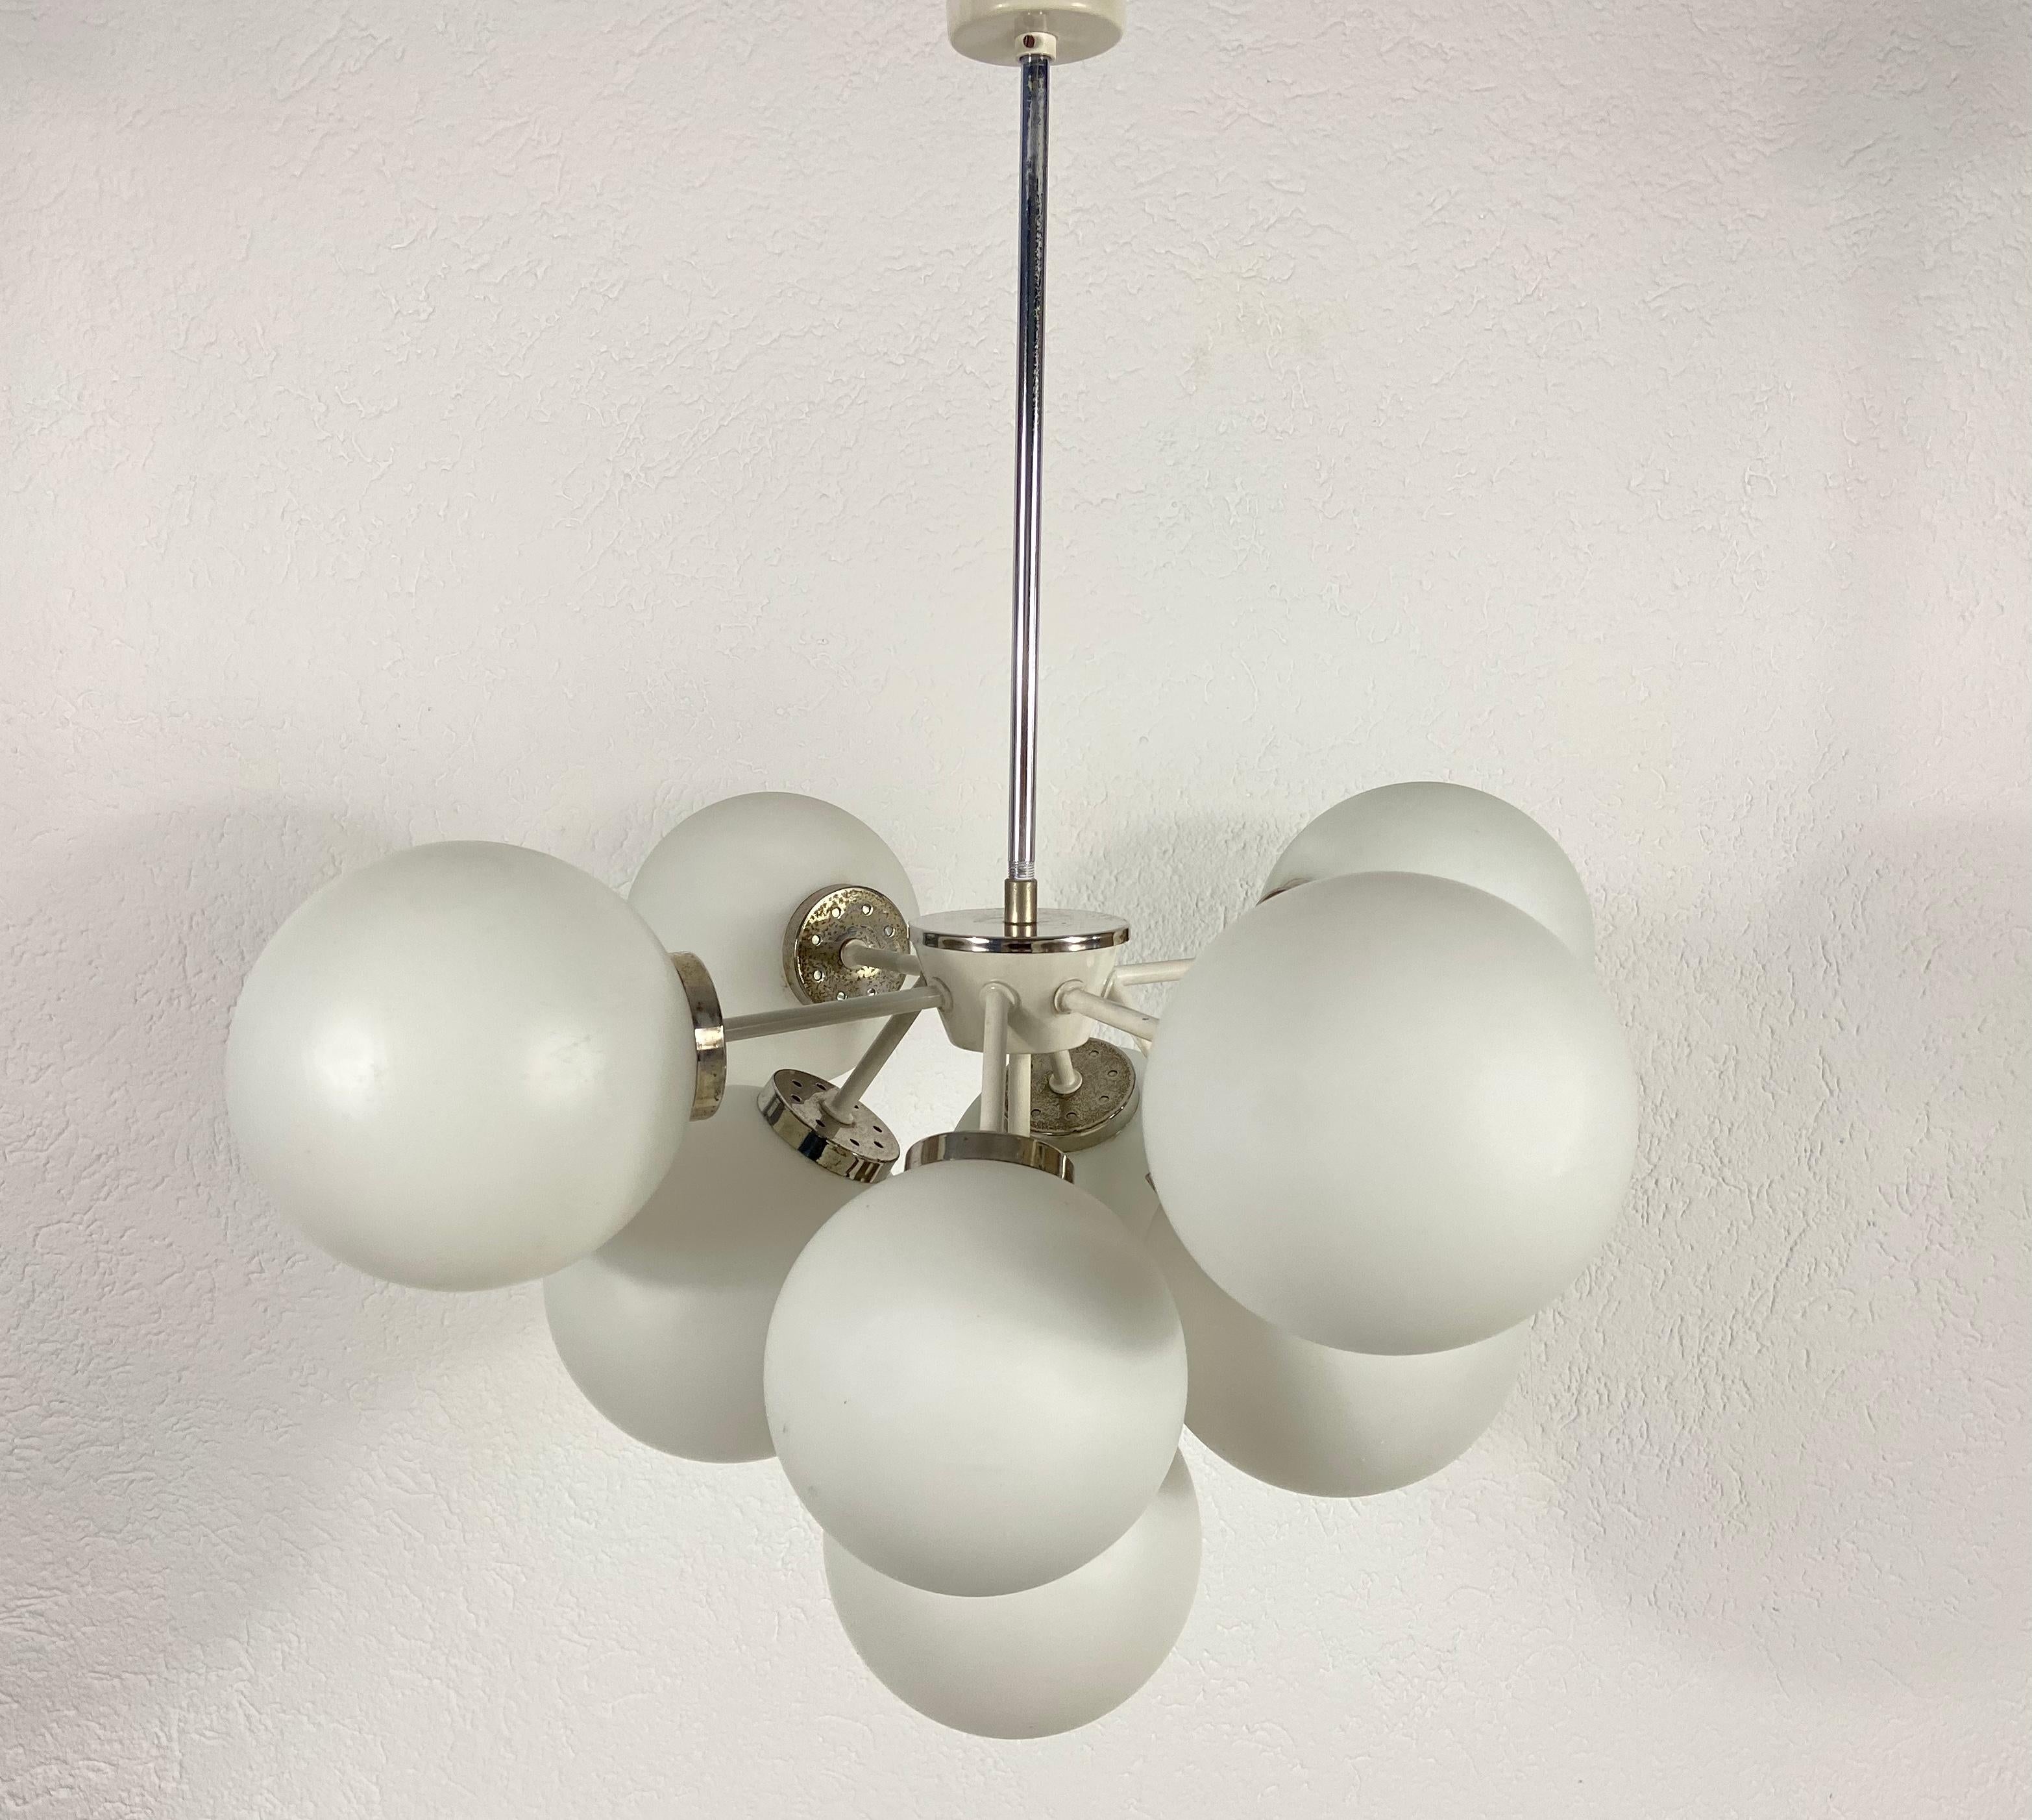 A midcentury chandelier by Kaiser made in Germany in the 1960s. It is fascinating with its Space Age design and nine opaque balls. The white circular body of the light is made of full metal, including the arms. White bar with white canopy.


The